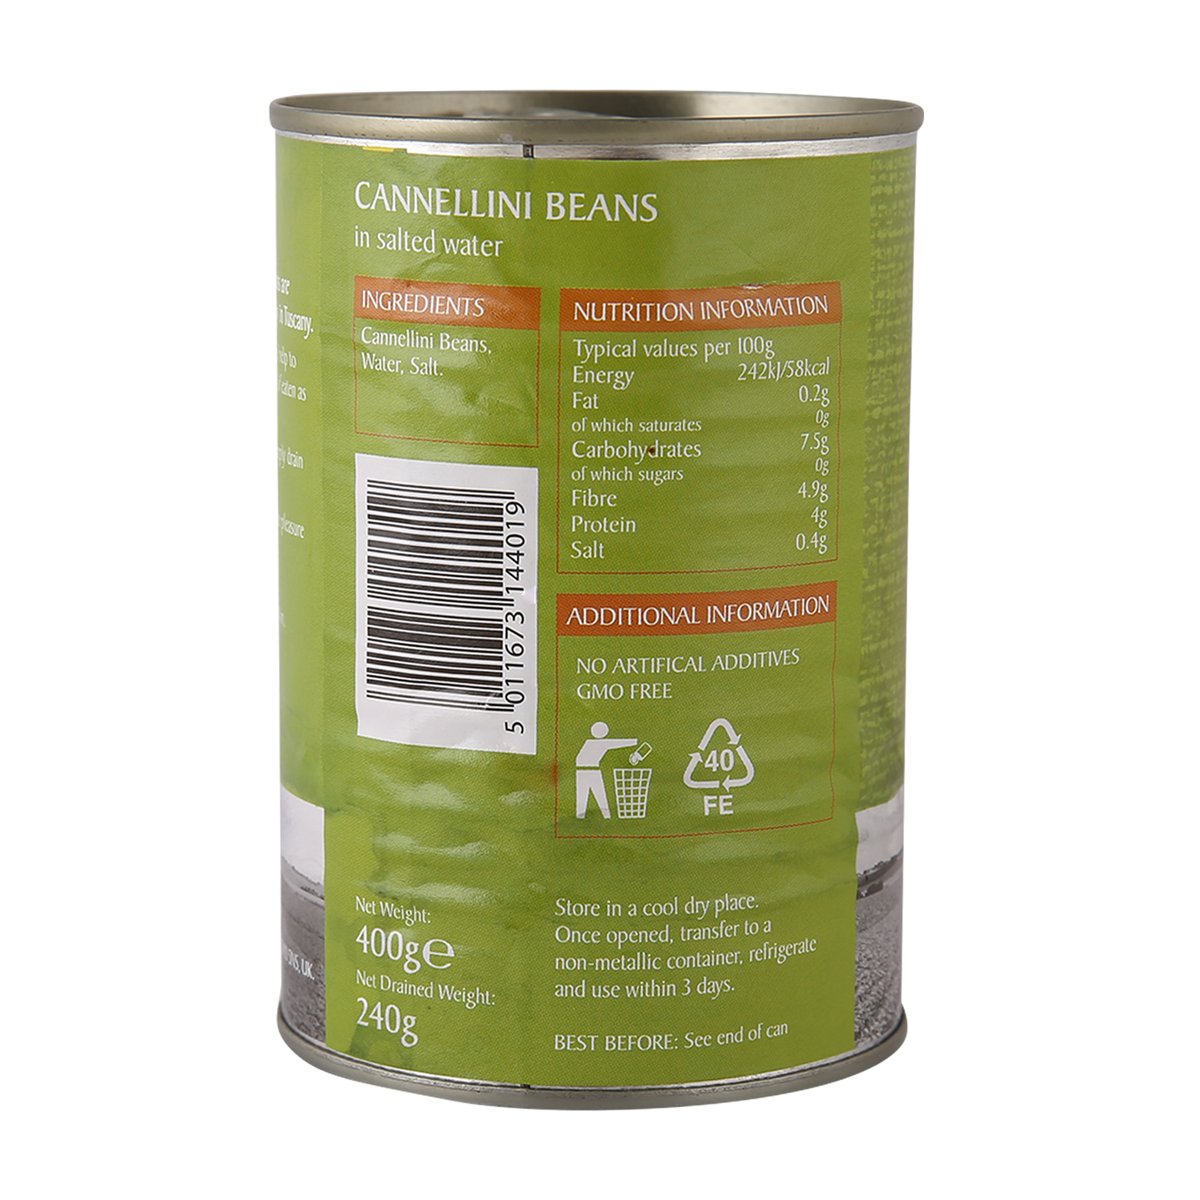 Epicure Cannellini Beans in Salted Water 400 g